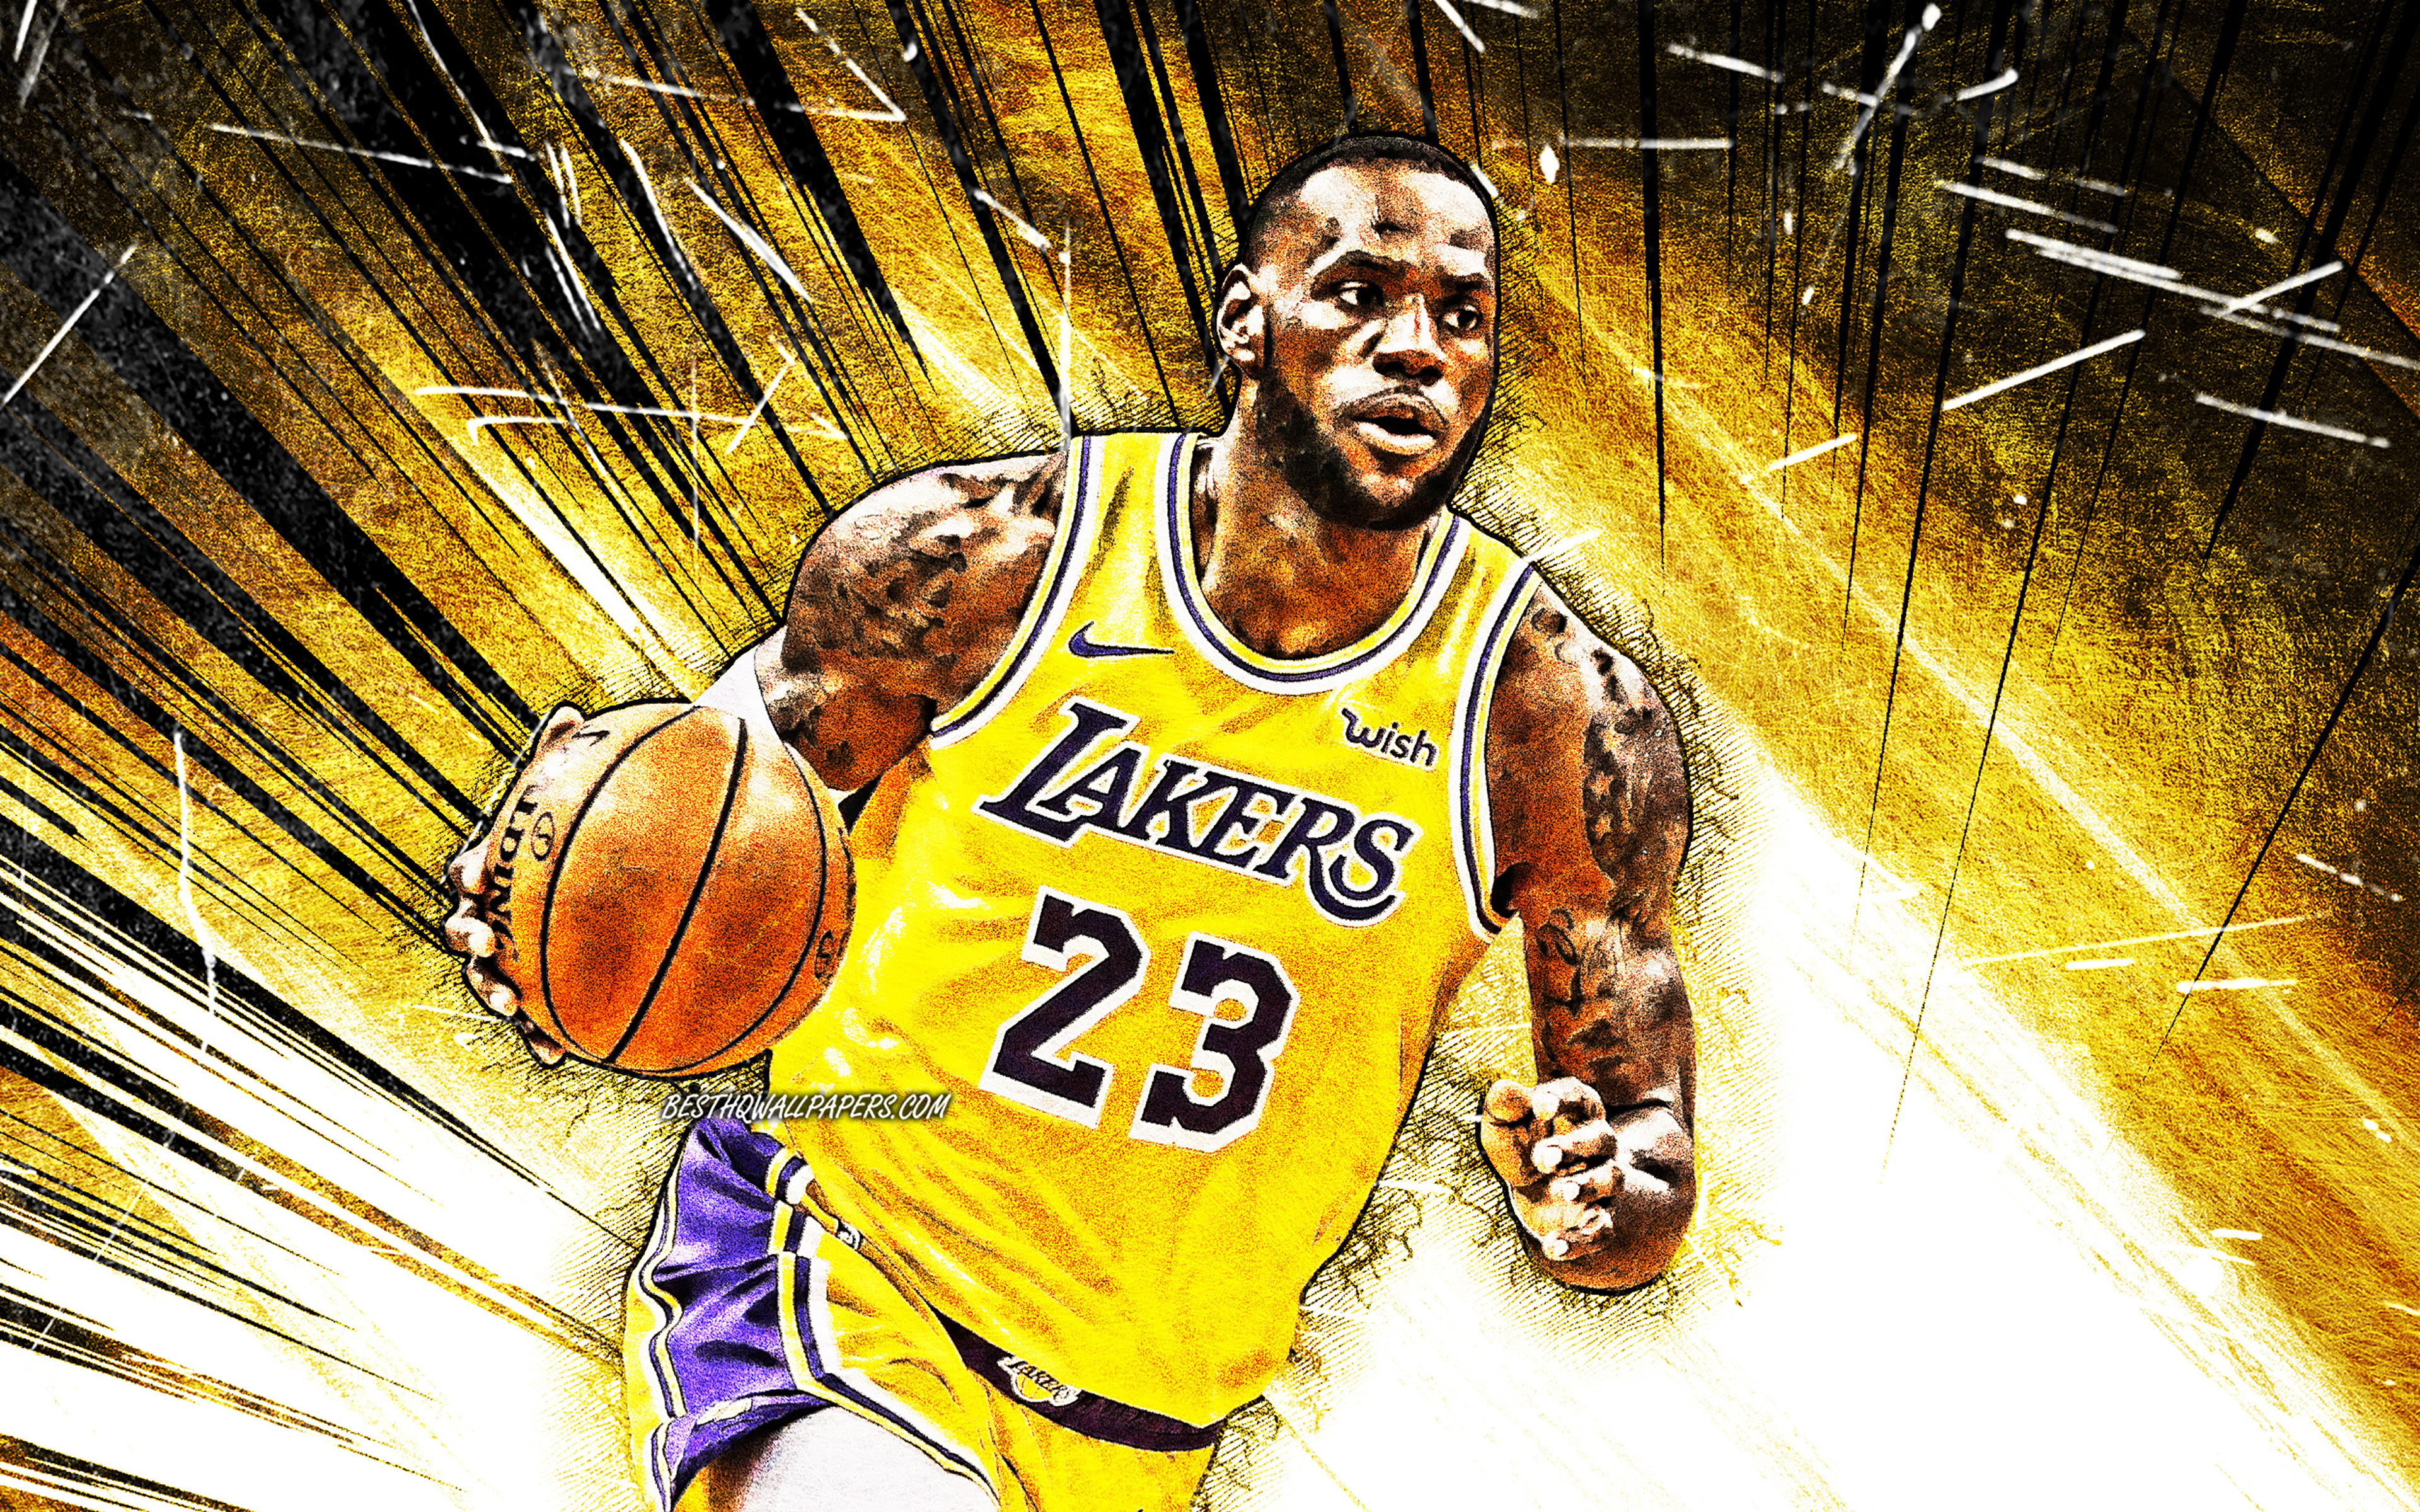 Download wallpaper LeBron James, grunge art, NBA, 4k, Los Angeles Lakers, yellow abstract rays, basketball stars, LeBron Raymone James Sr, basketball, LA Lakers, LeBron James 4K, creative, LeBron James Lakers for desktop